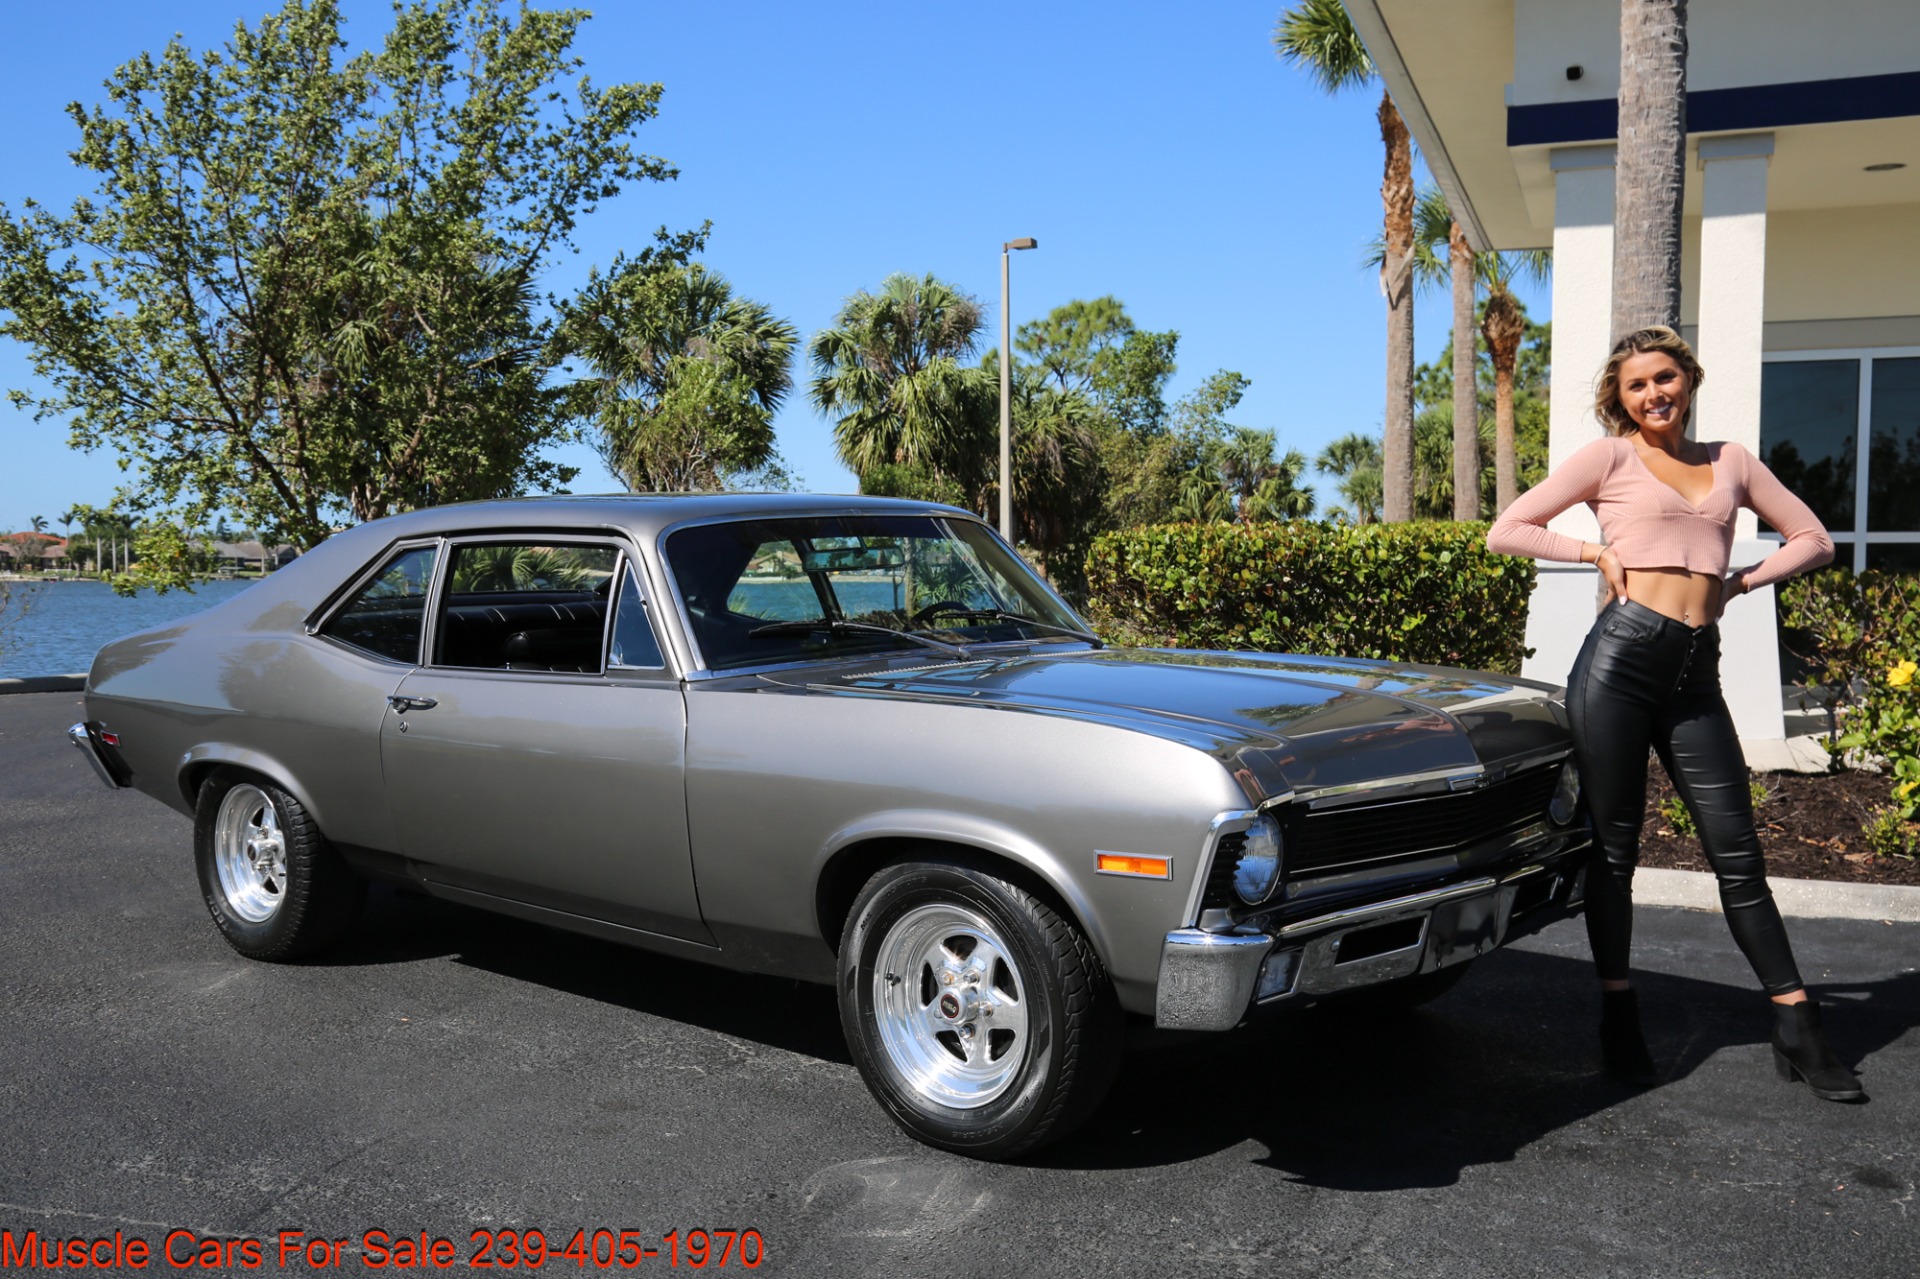 Used 1971 Chevrolet Nova V8 Auto for sale $31,000 at Muscle Cars for Sale Inc. in Fort Myers FL 33912 2